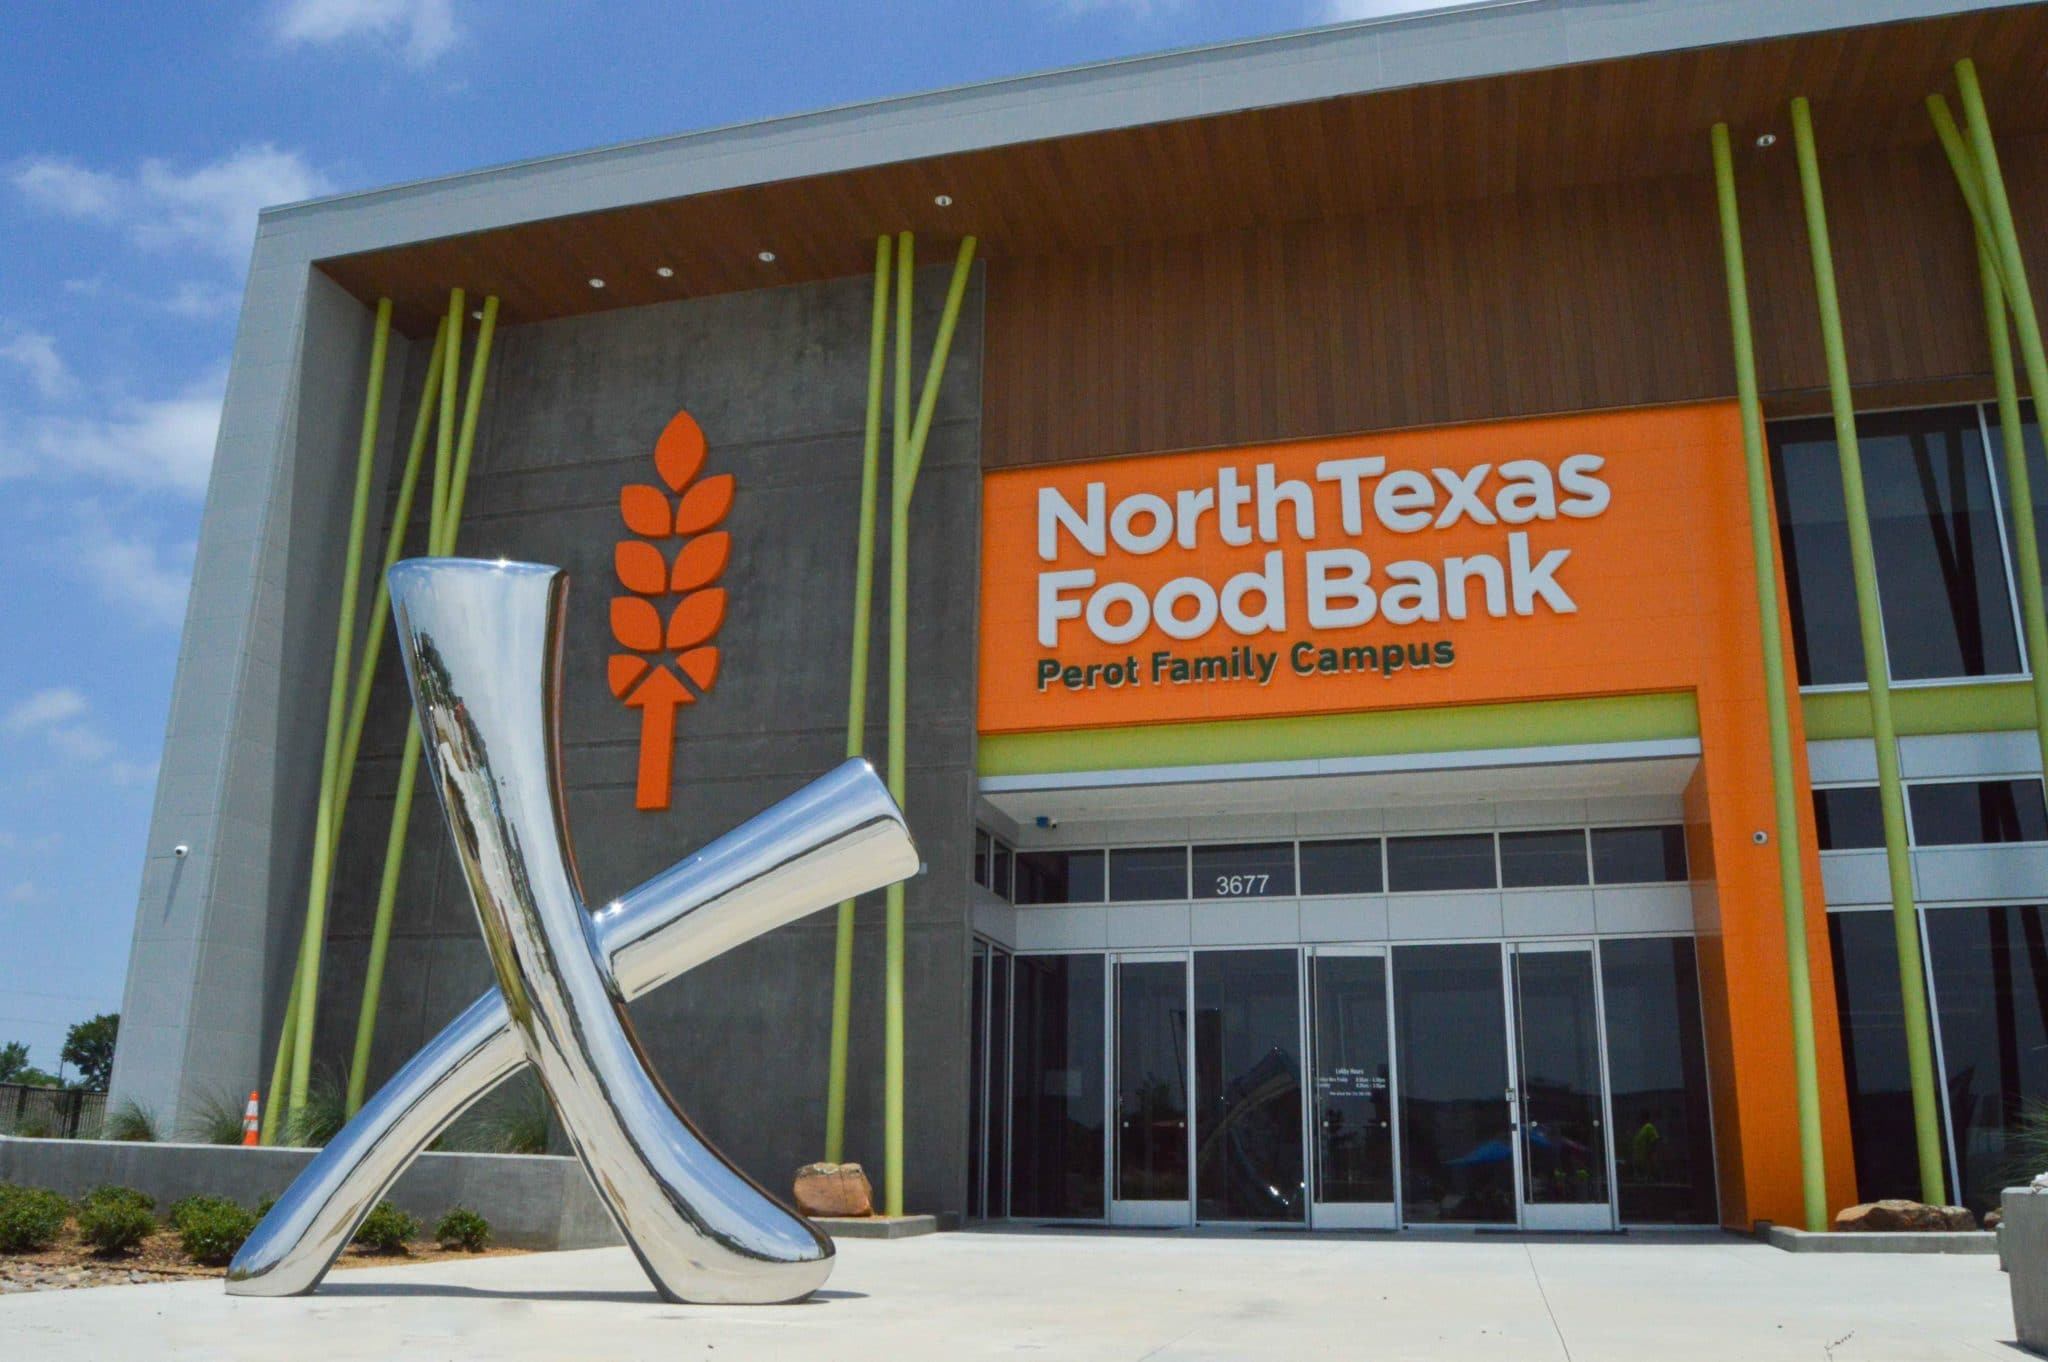 The outside of the North Texas Food Bank's Perot Family Campus